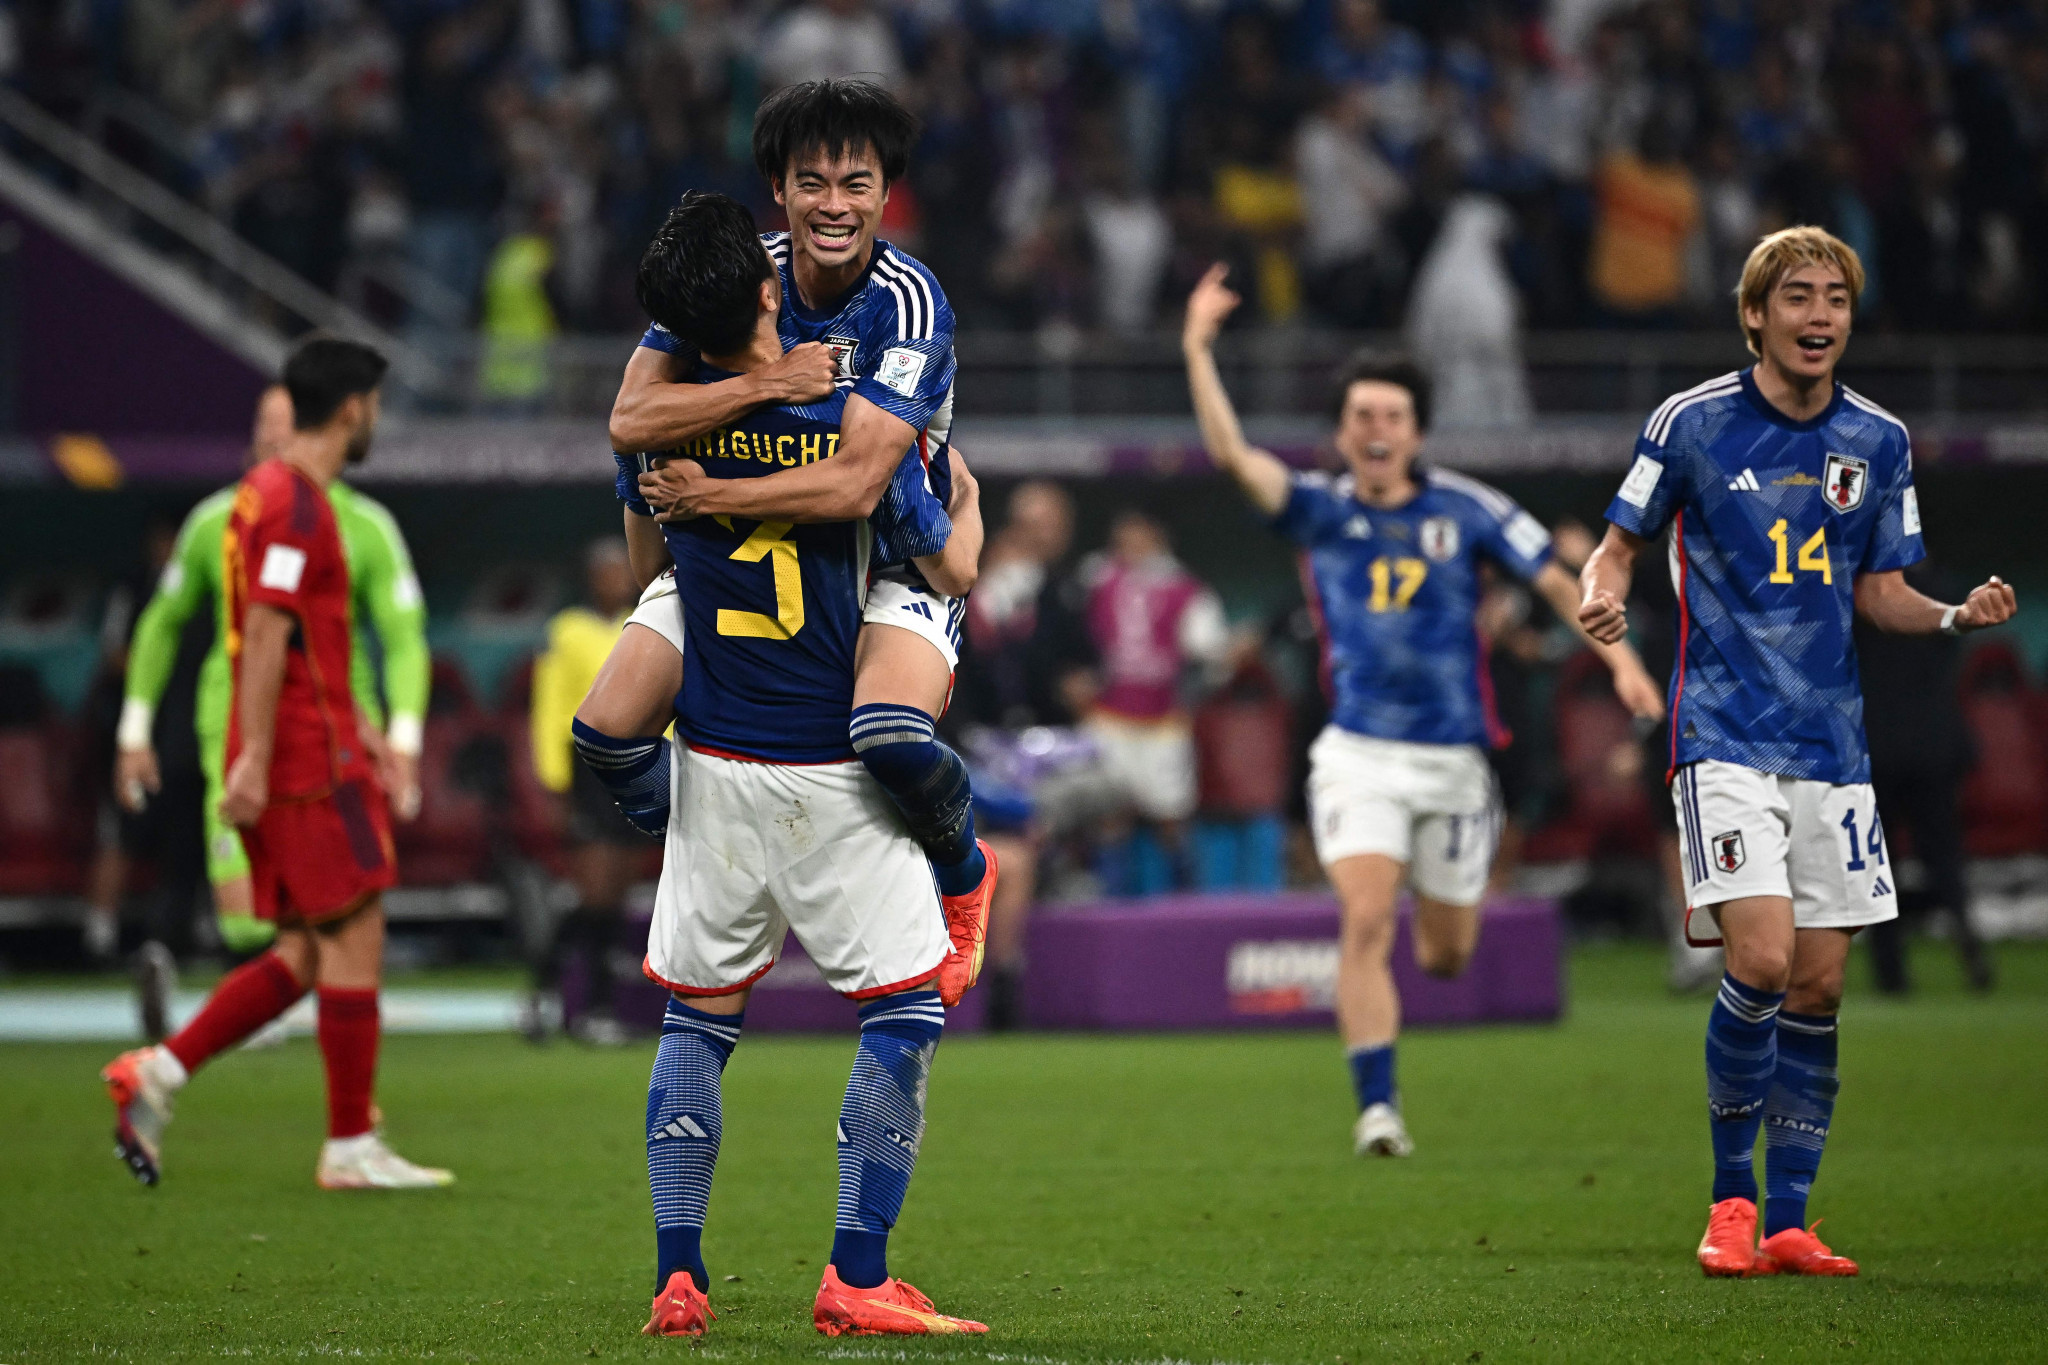 Japan progressed to the round of 16 with a famous win over Spain ©Getty Images